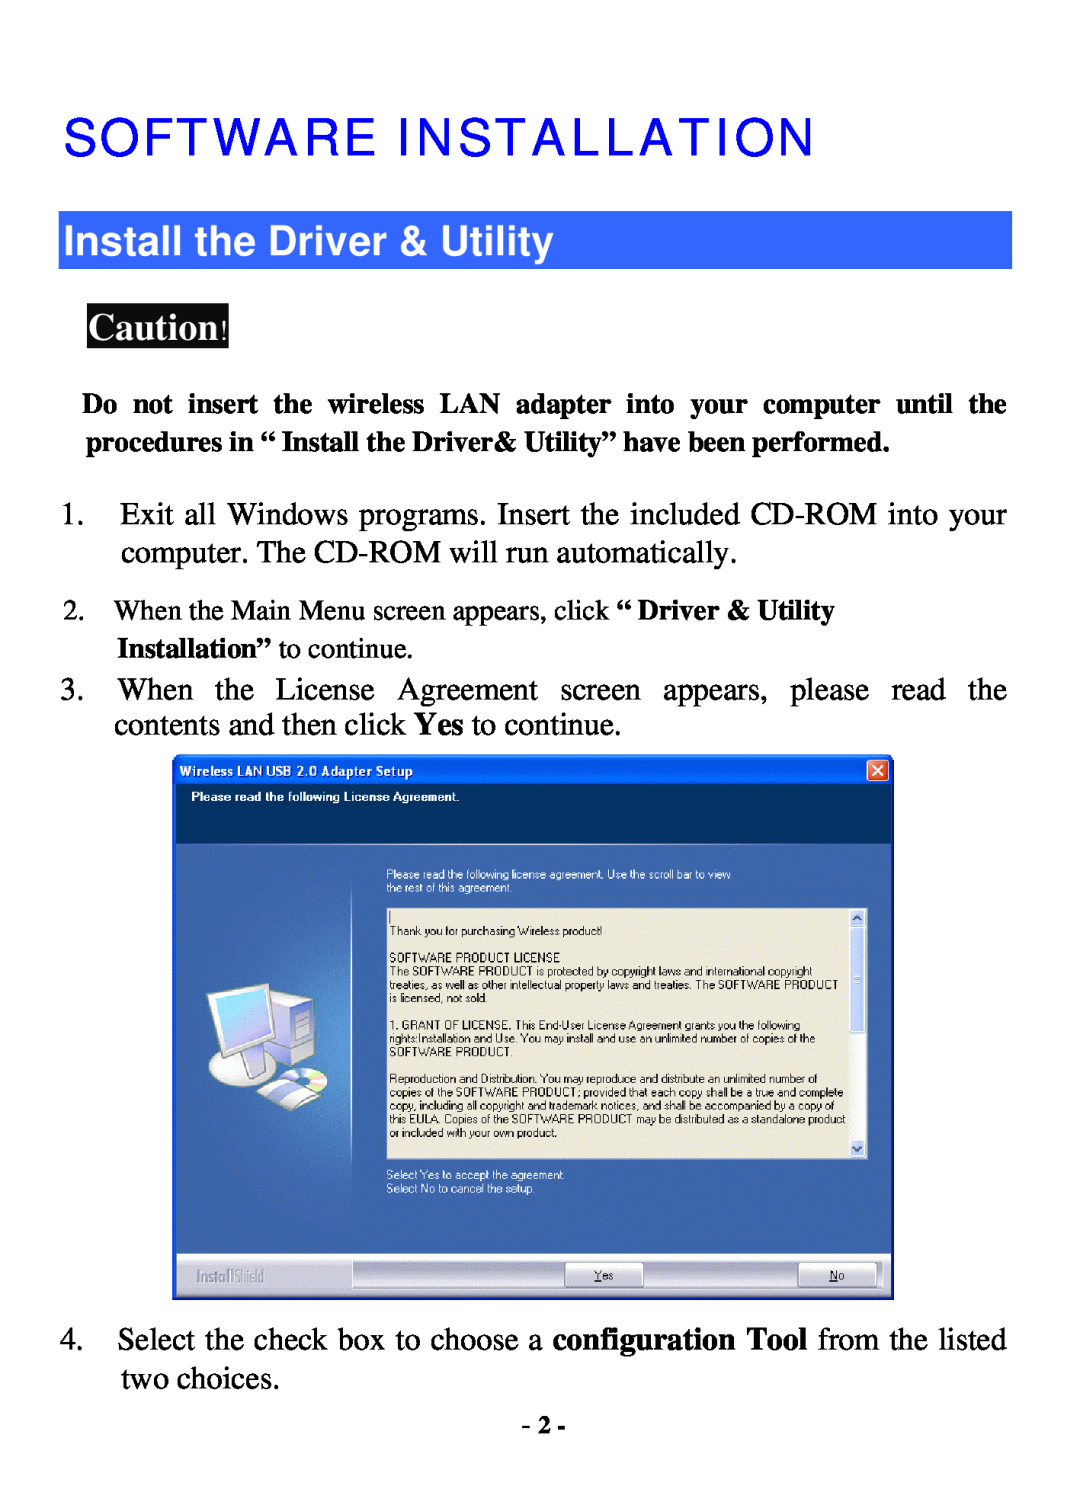 Xterasys USB Adapter user manual Software Installation, Install the Driver & Utility 